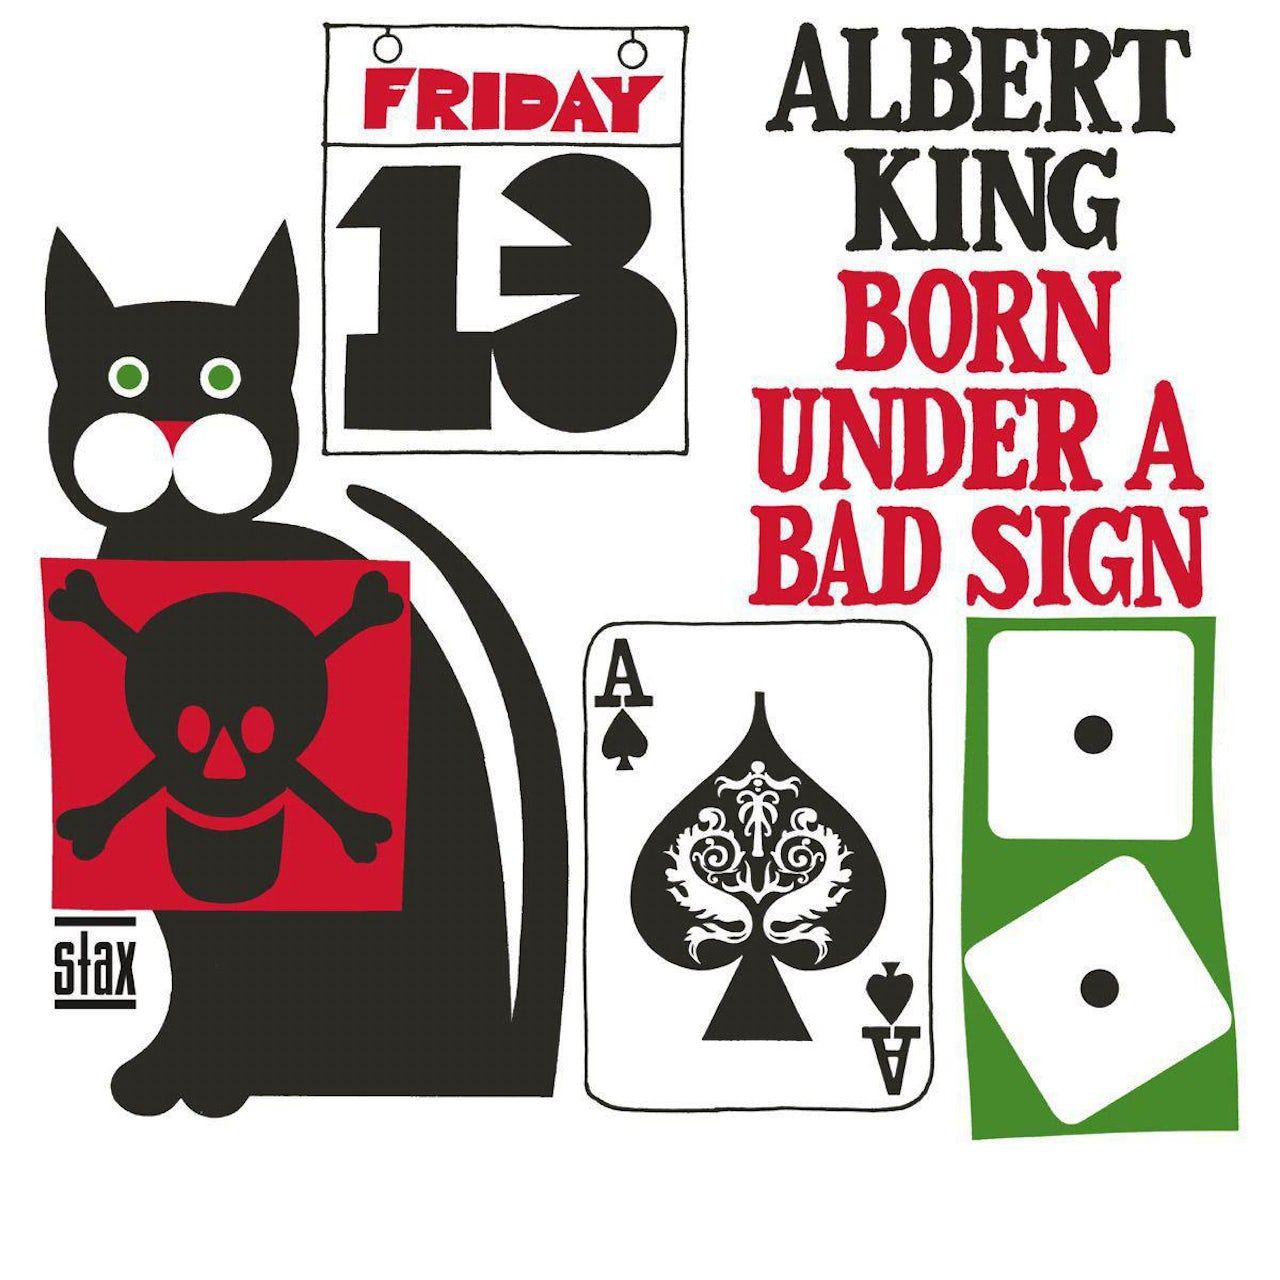 Виниловая пластинка King, Albert, Born Under A Bad Sign (0888072416888) fearnley jan oh me oh my a pie